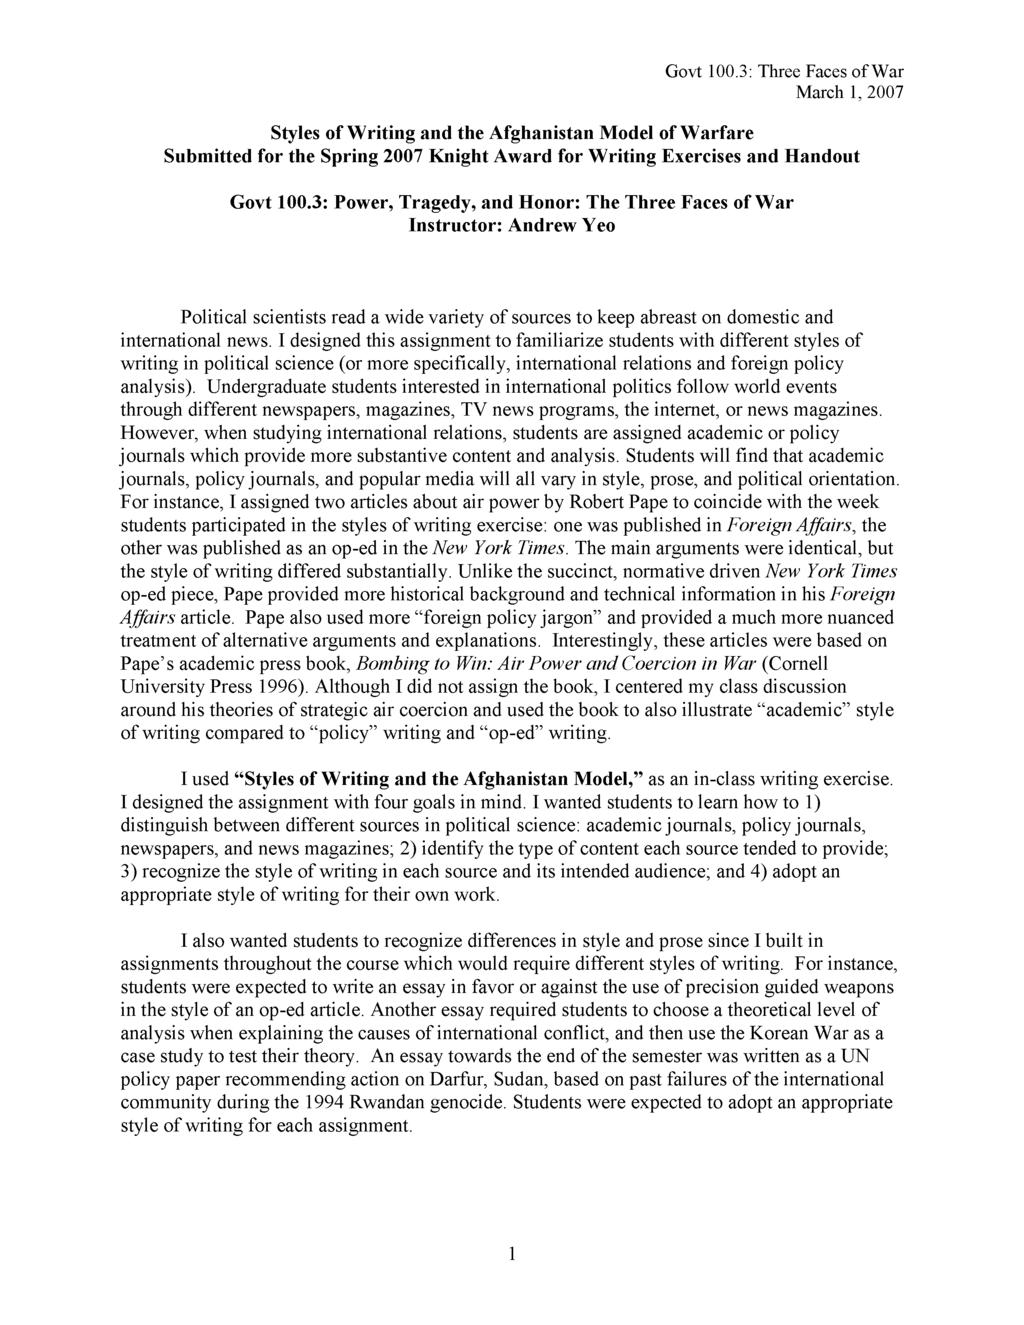 Styles of Writing and the Afghanistan Model of Warfare Submitted for the Spring 2007 Knight Award for Writing Exercises and Handout Govt 100.